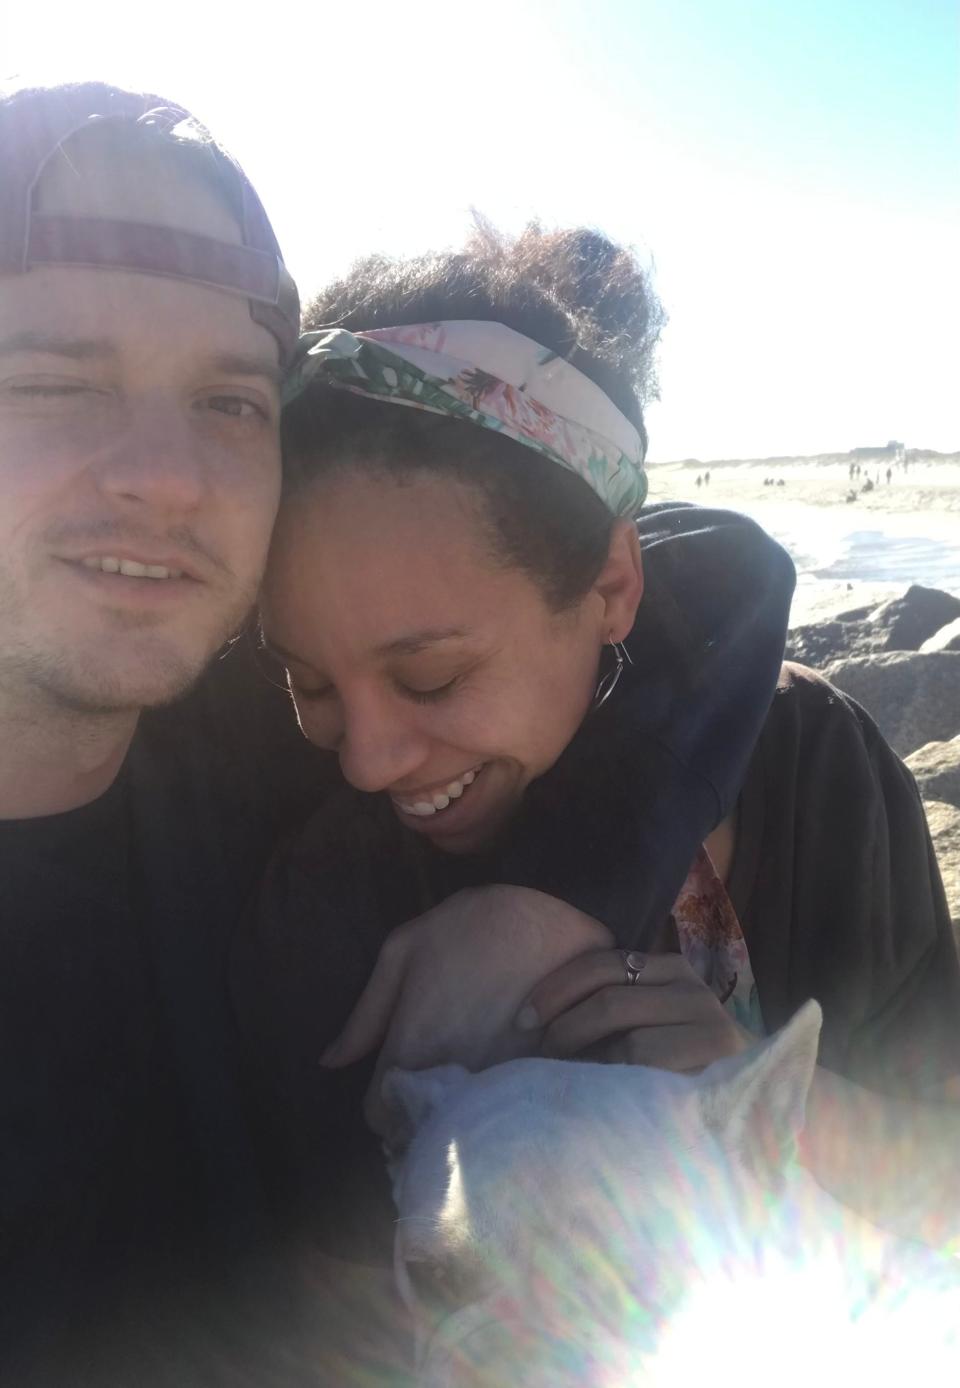 Chase VanLeeuwen, 30, takes a selfie with his fiancé, Jasmine Greenwood. Since an armed robbery at a recording studio in West Asheville Dec. 22, Greenwood said she feels VanLeeuwen has been unfairly ripped away from her and everyone else who loved and needed him.